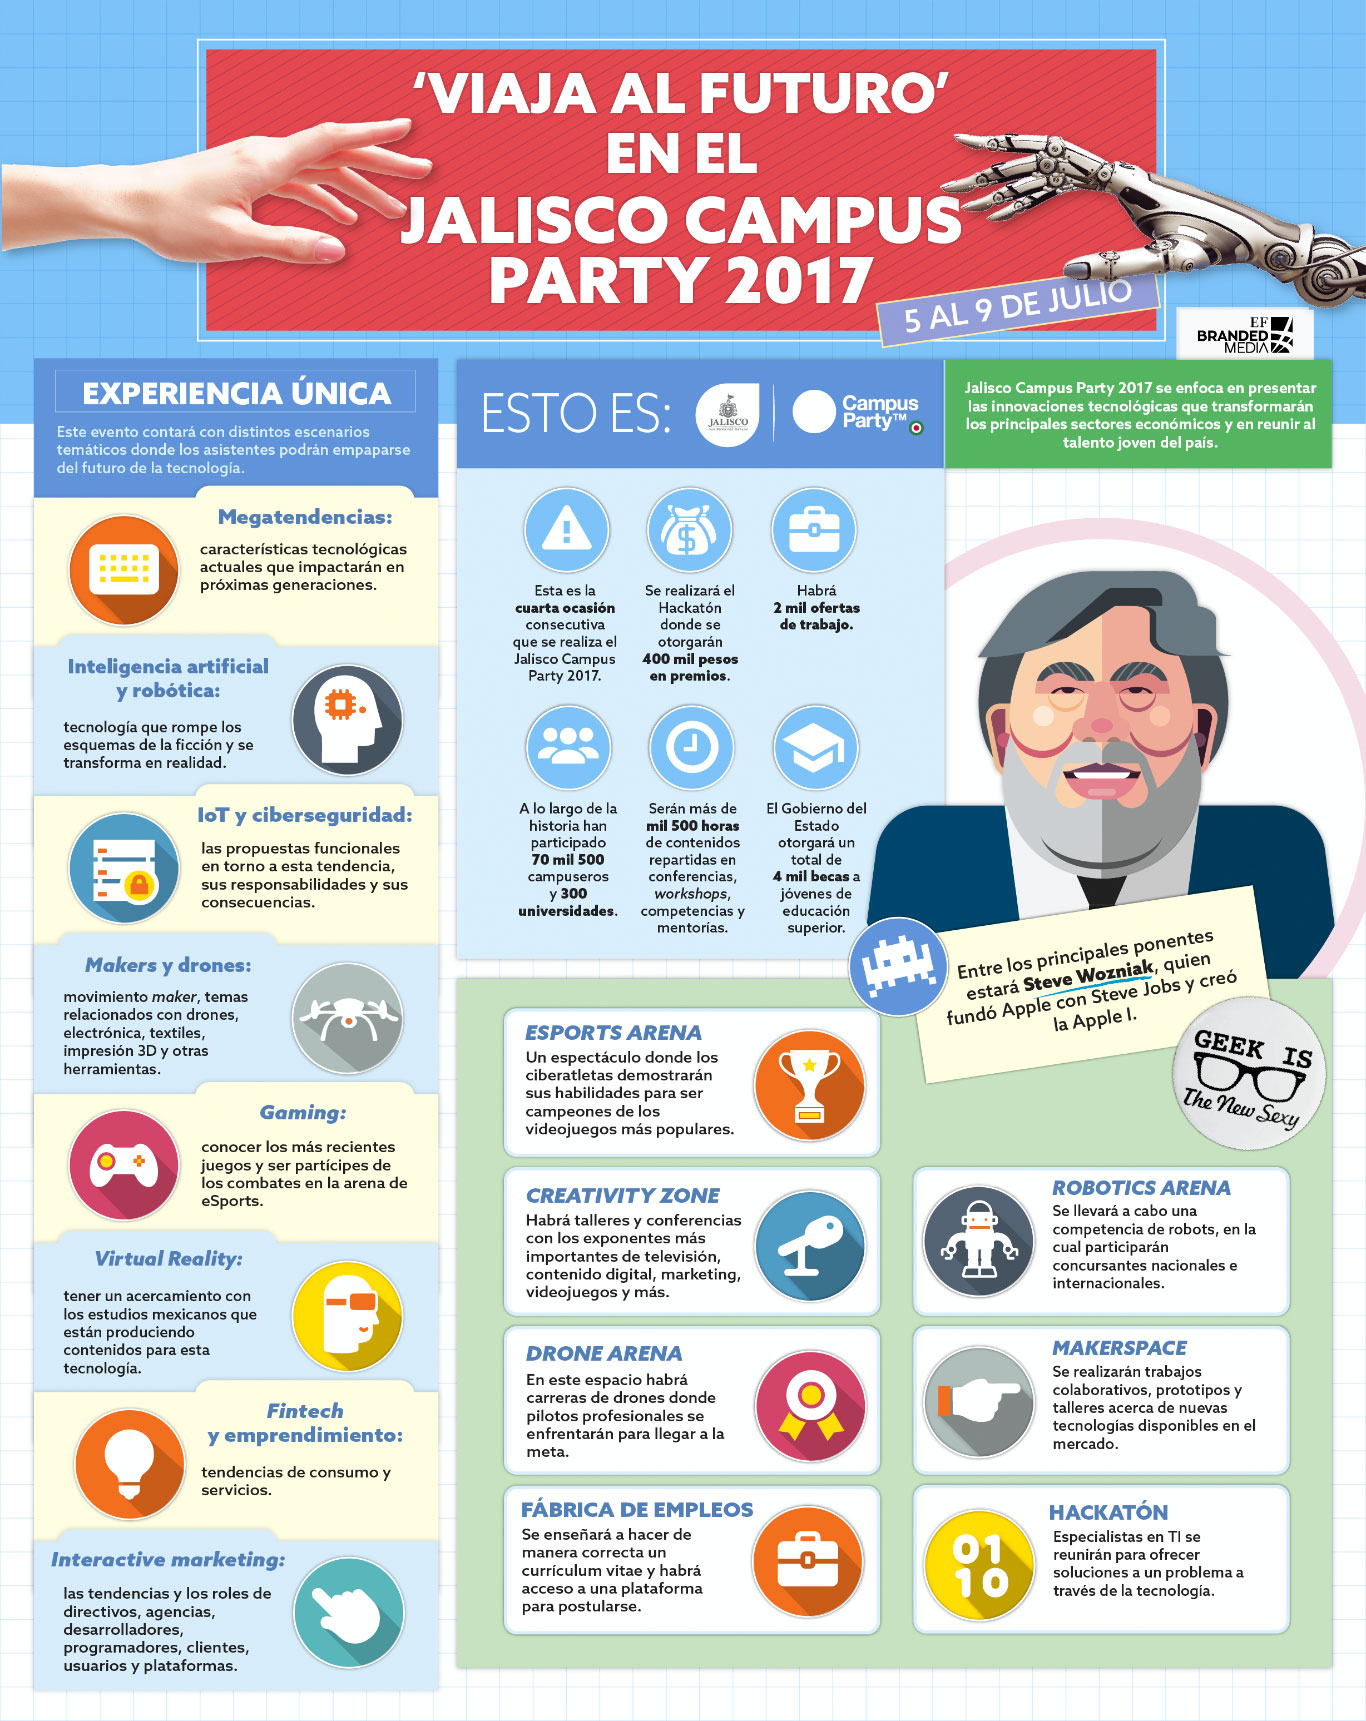 Jalisco Campus Party